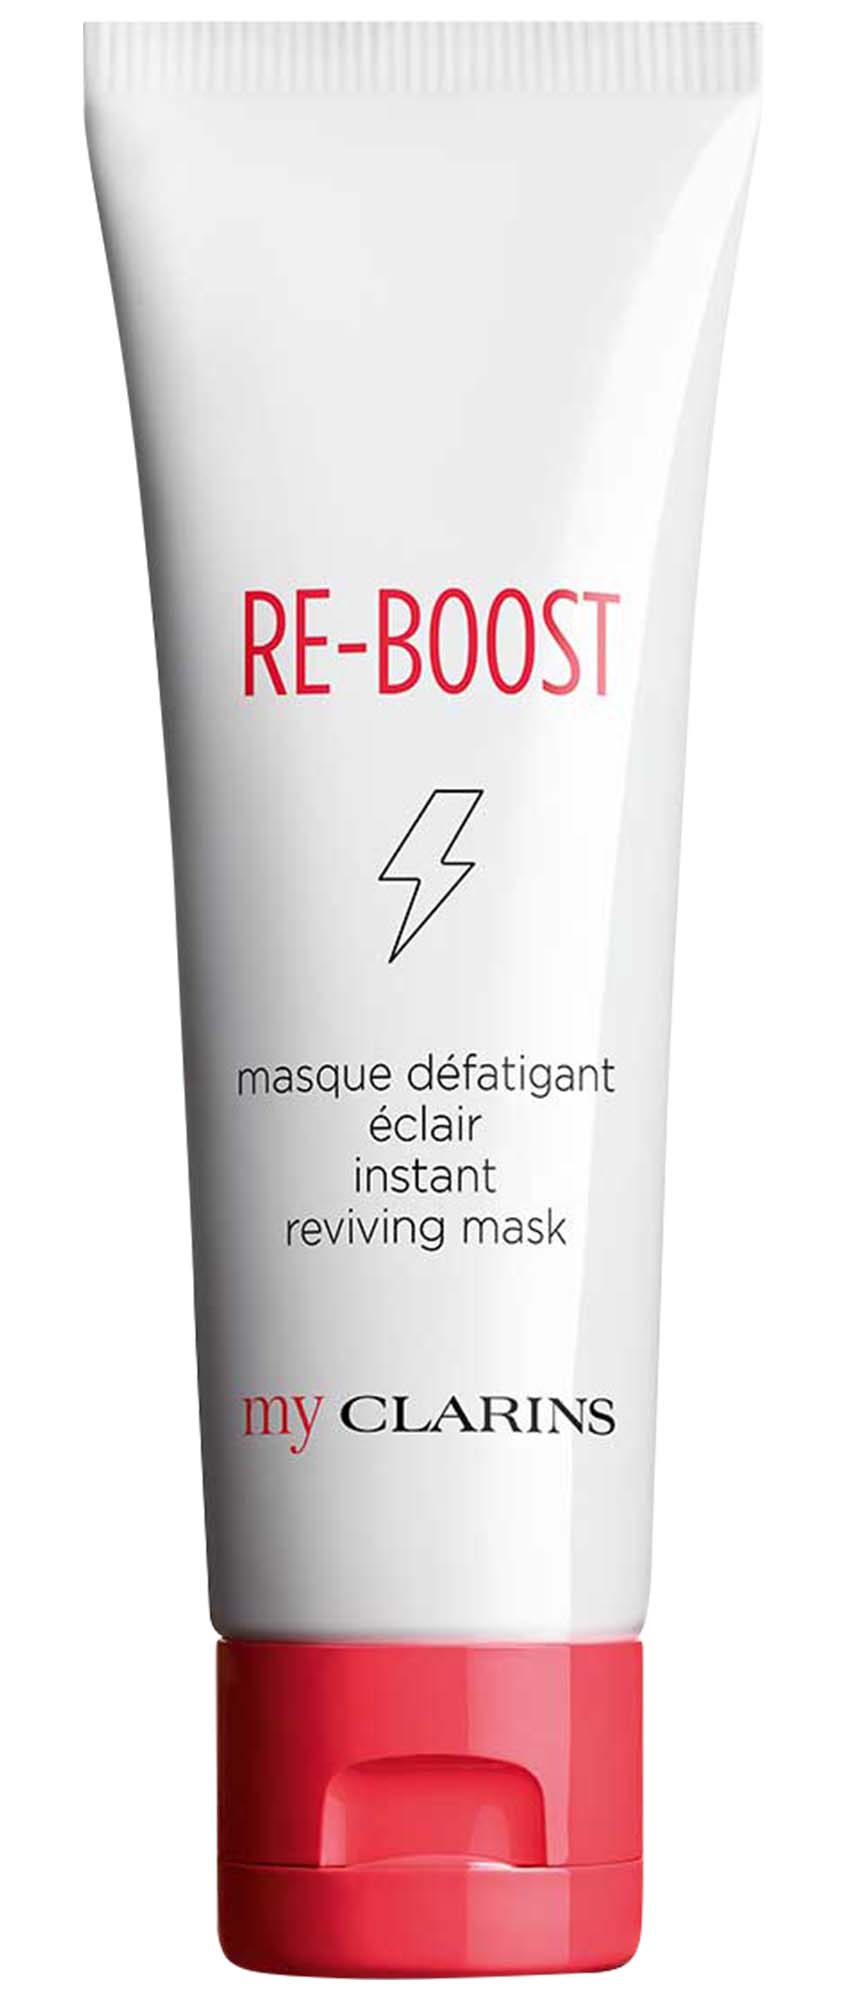 My Clarins Re-boost Instant Reviving Mask